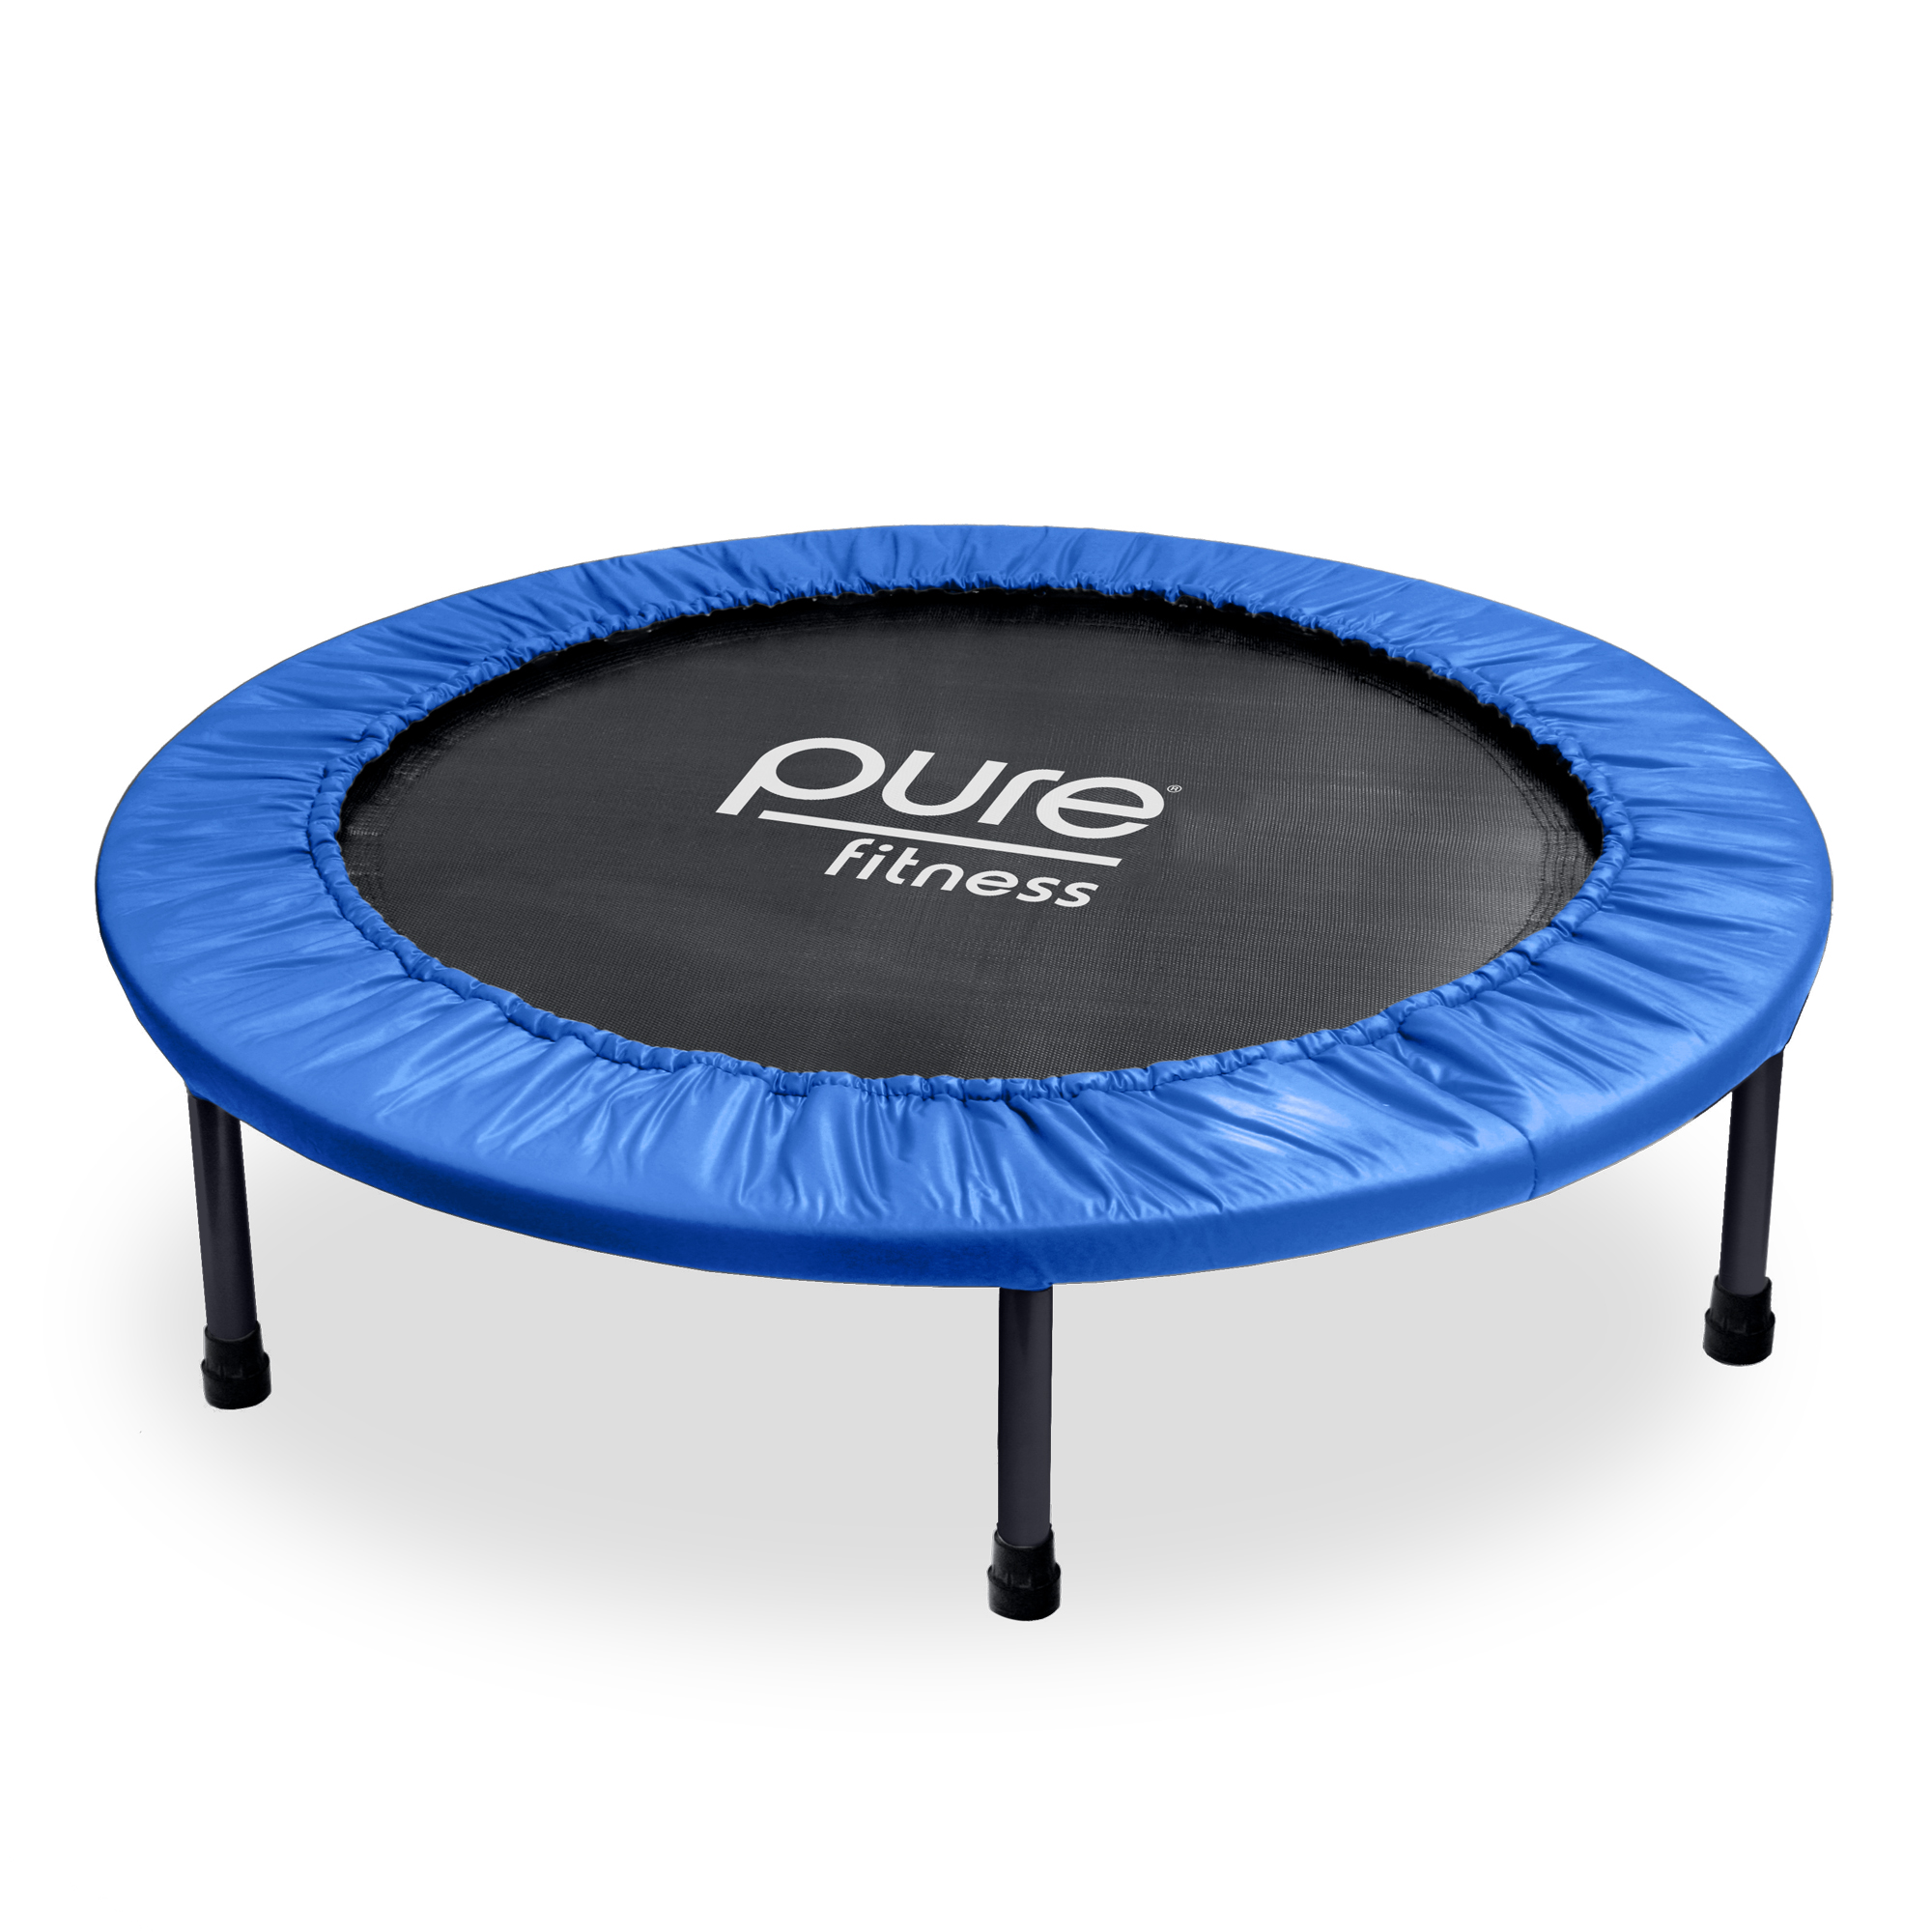 Pure Fitness 40-inch Exercise Trampoline 9040mt